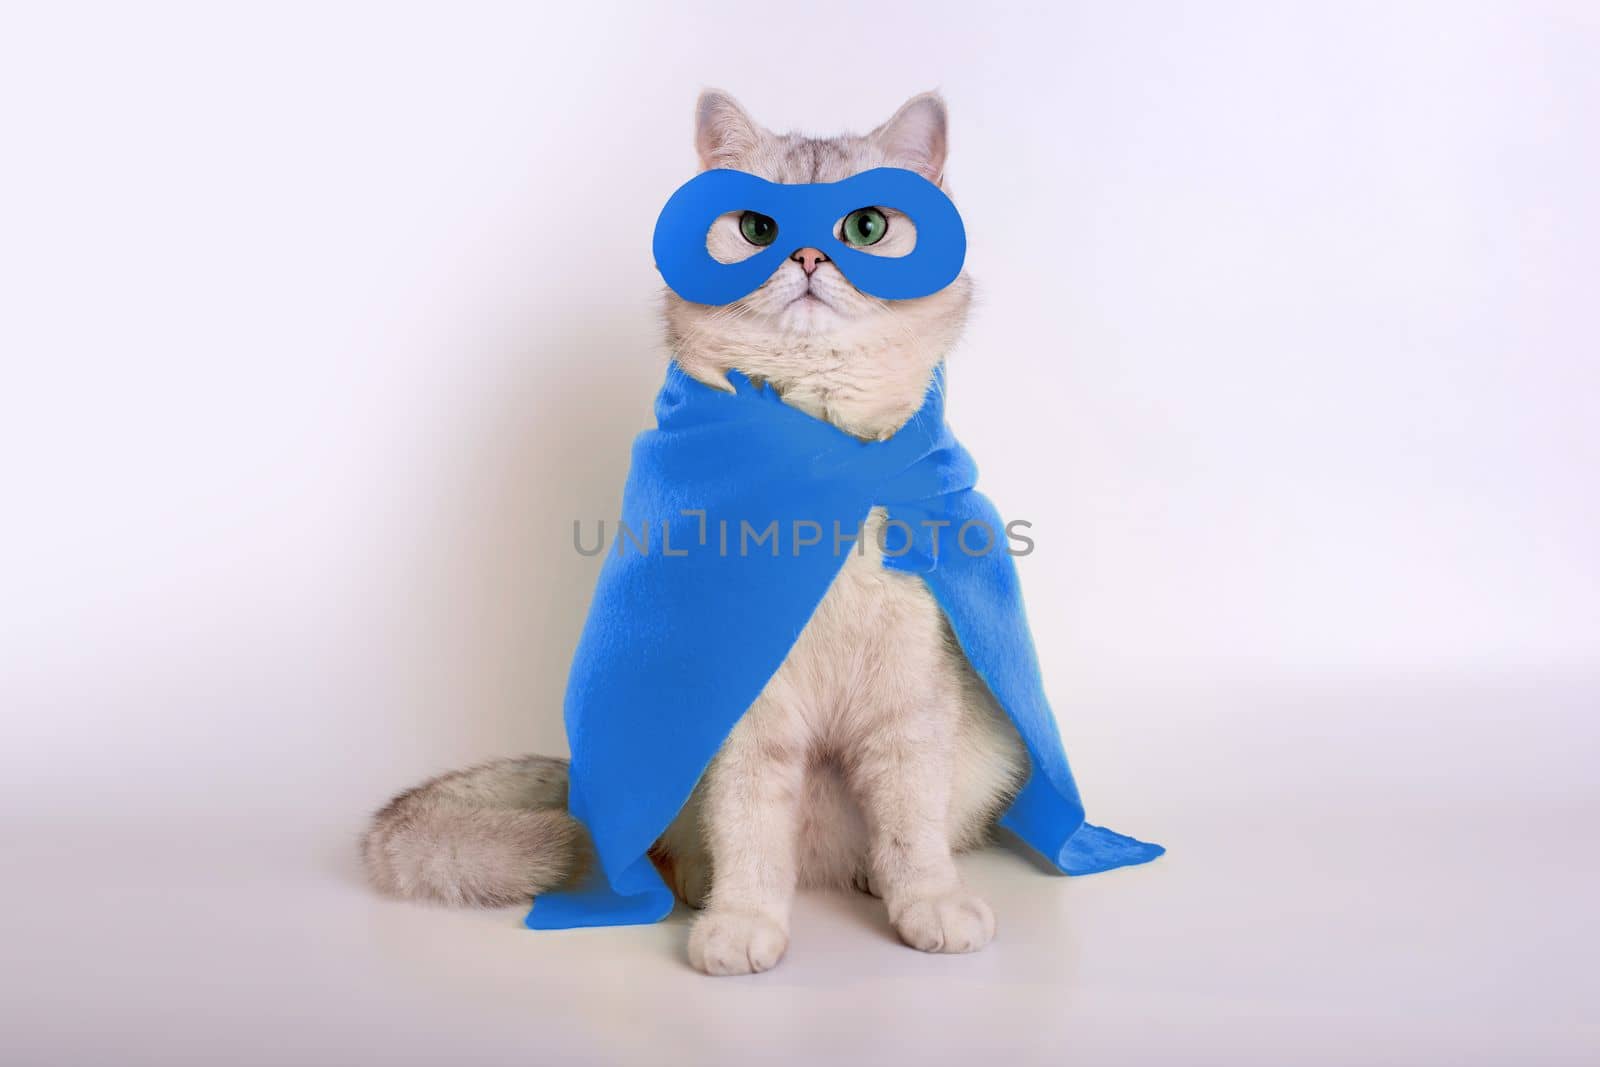 Funny white cat in a blue superhero costume: blue mask and cape, sits on white background, look at camera